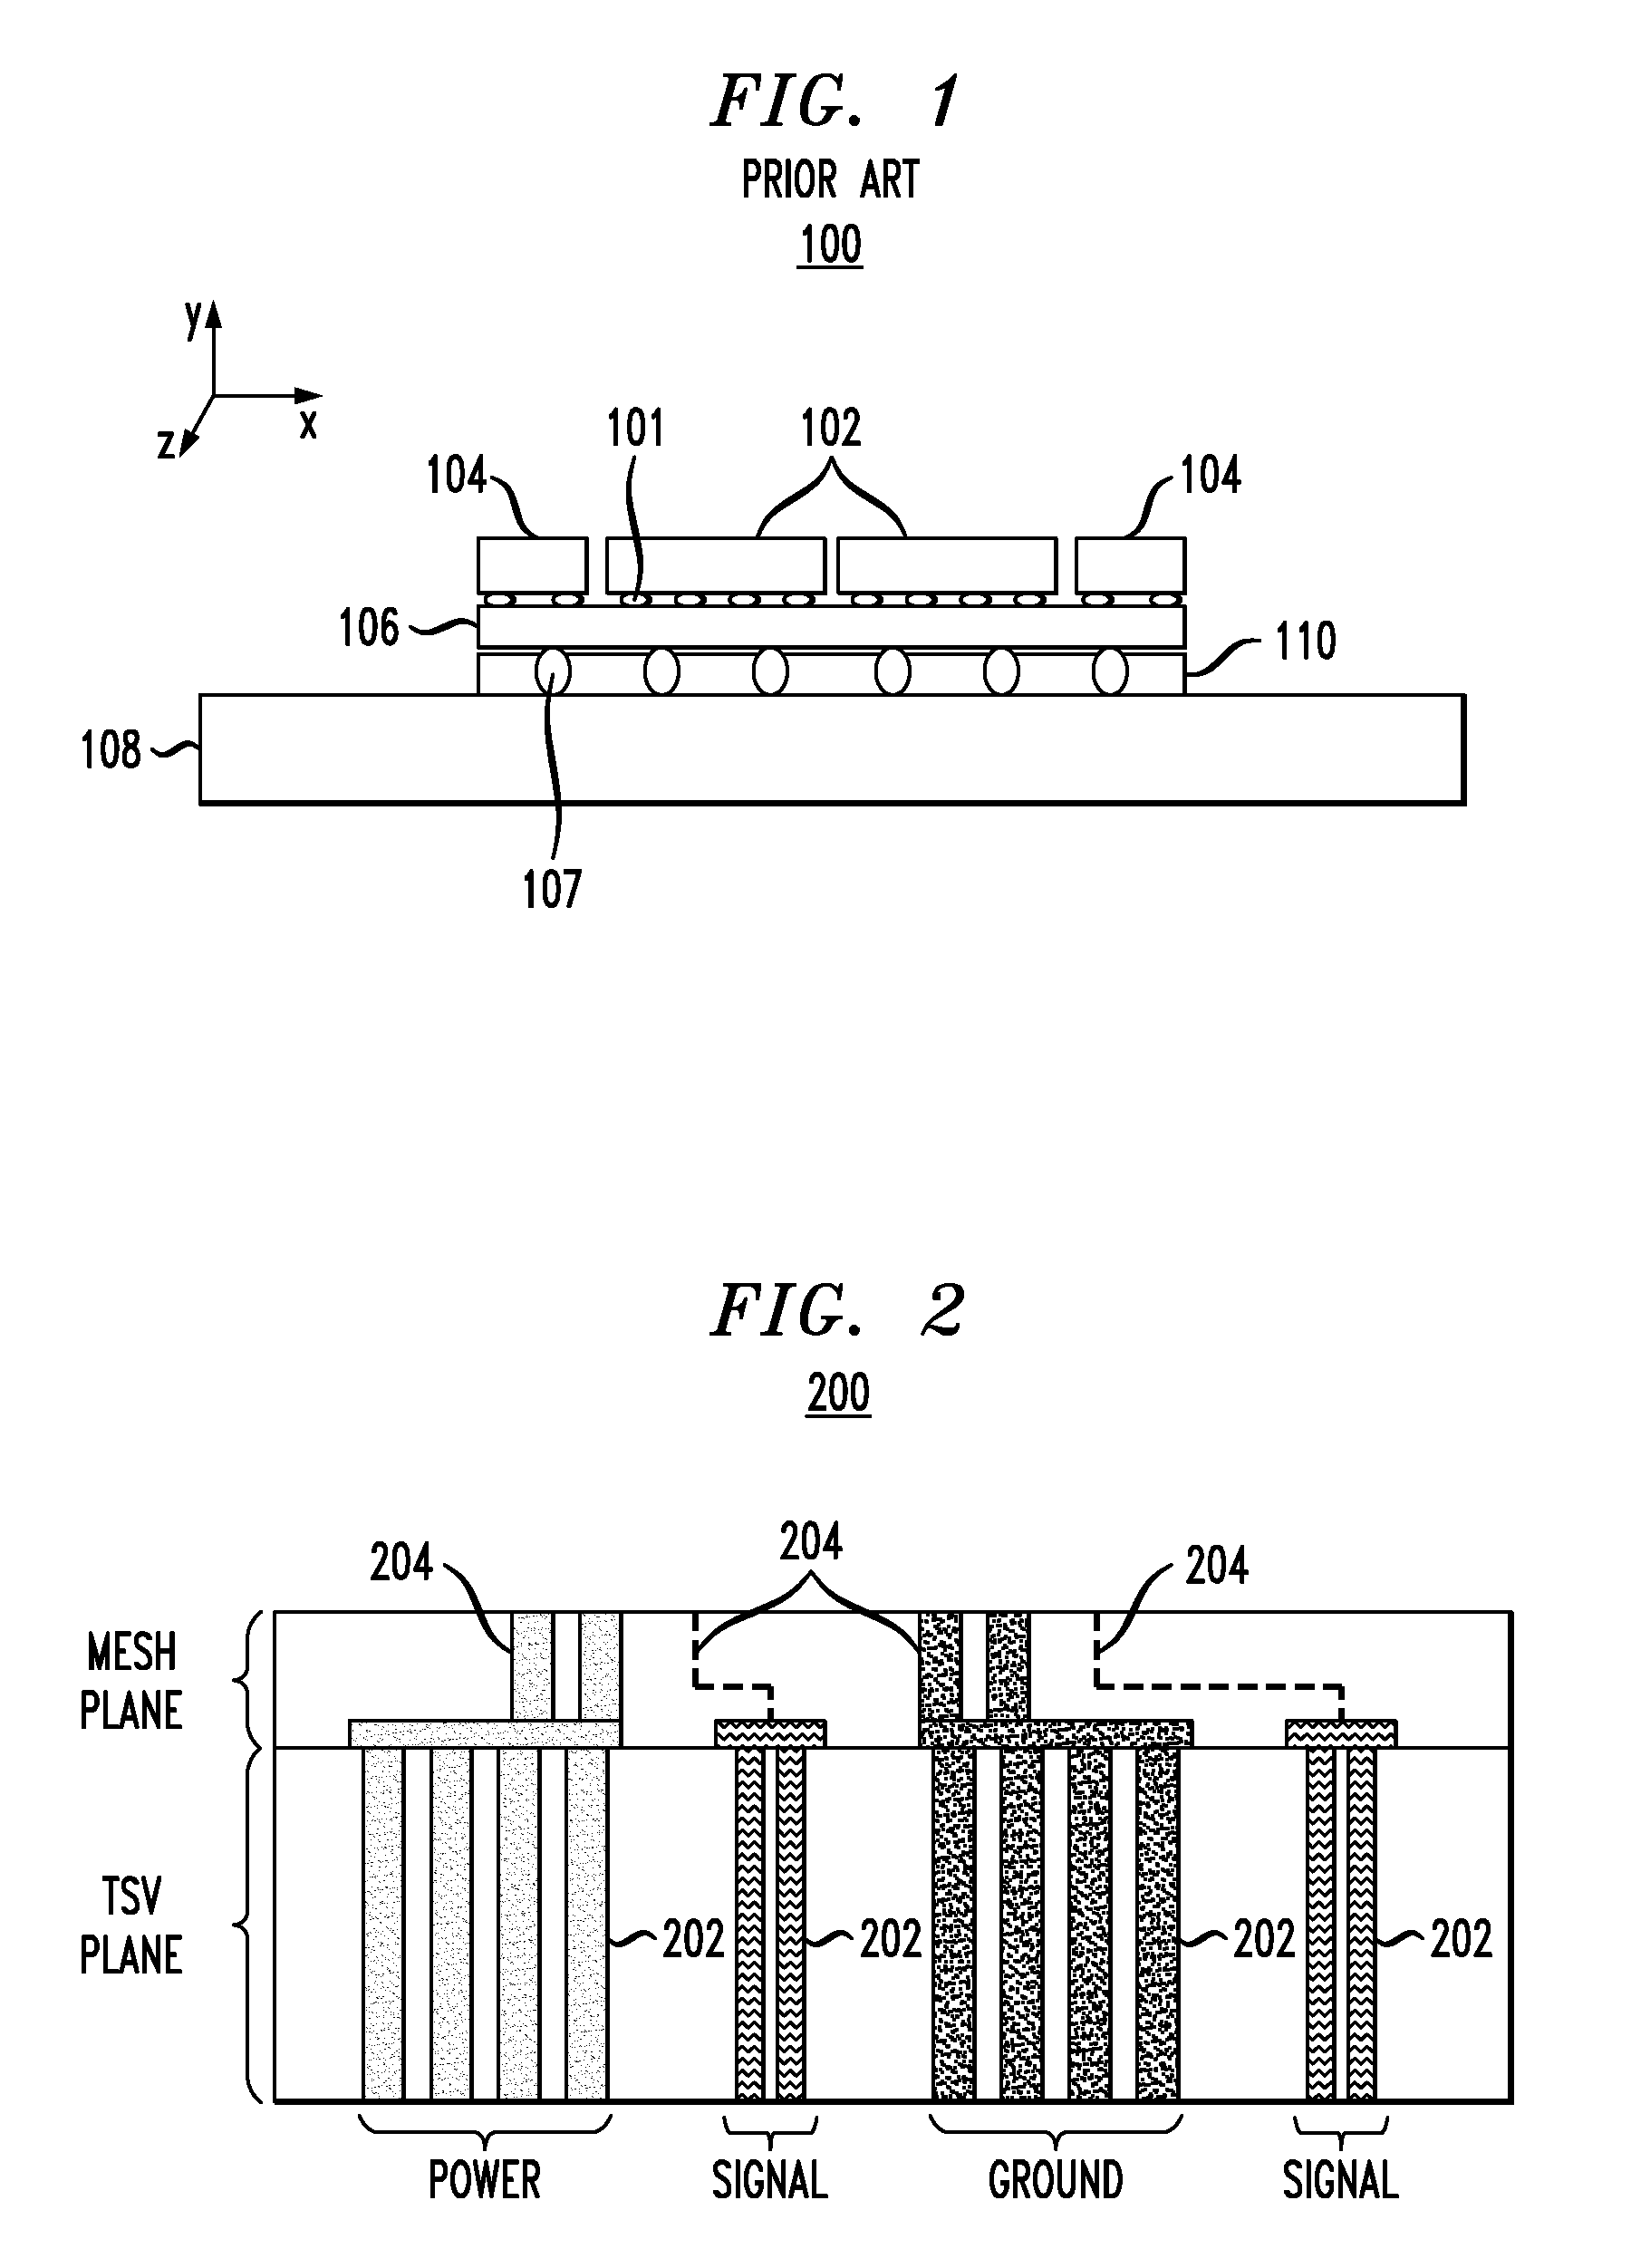 Three-Dimensional Silicon Interposer for Low Voltage Low Power Systems